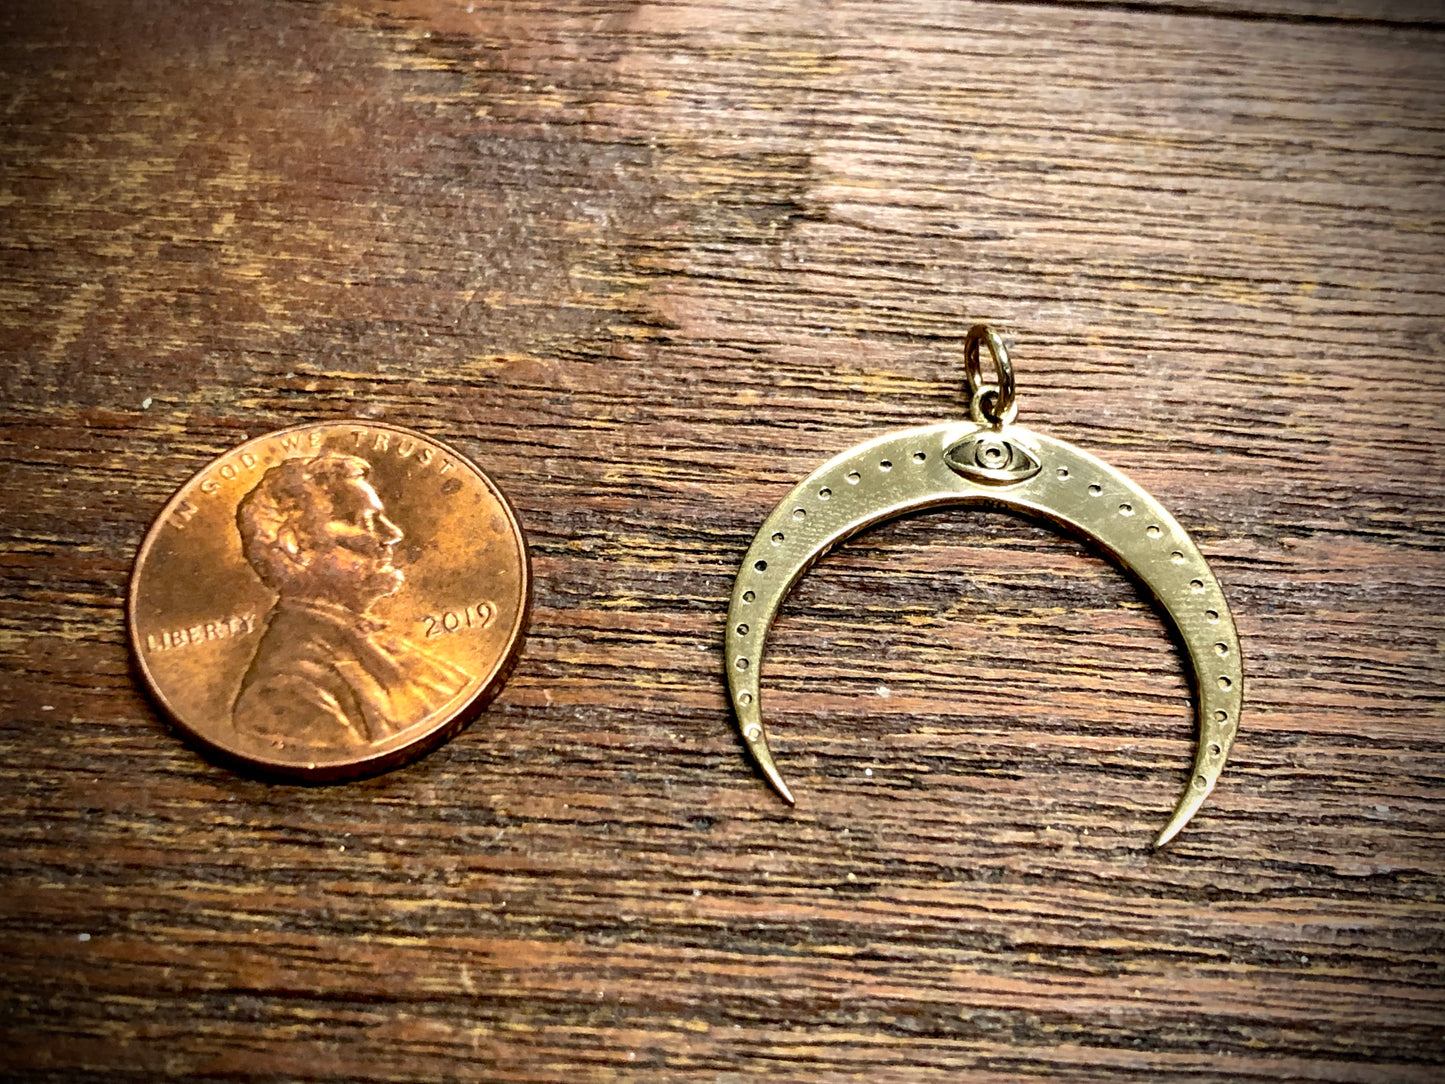 Bronze Moon Pendant Charm with All Seeing Eye